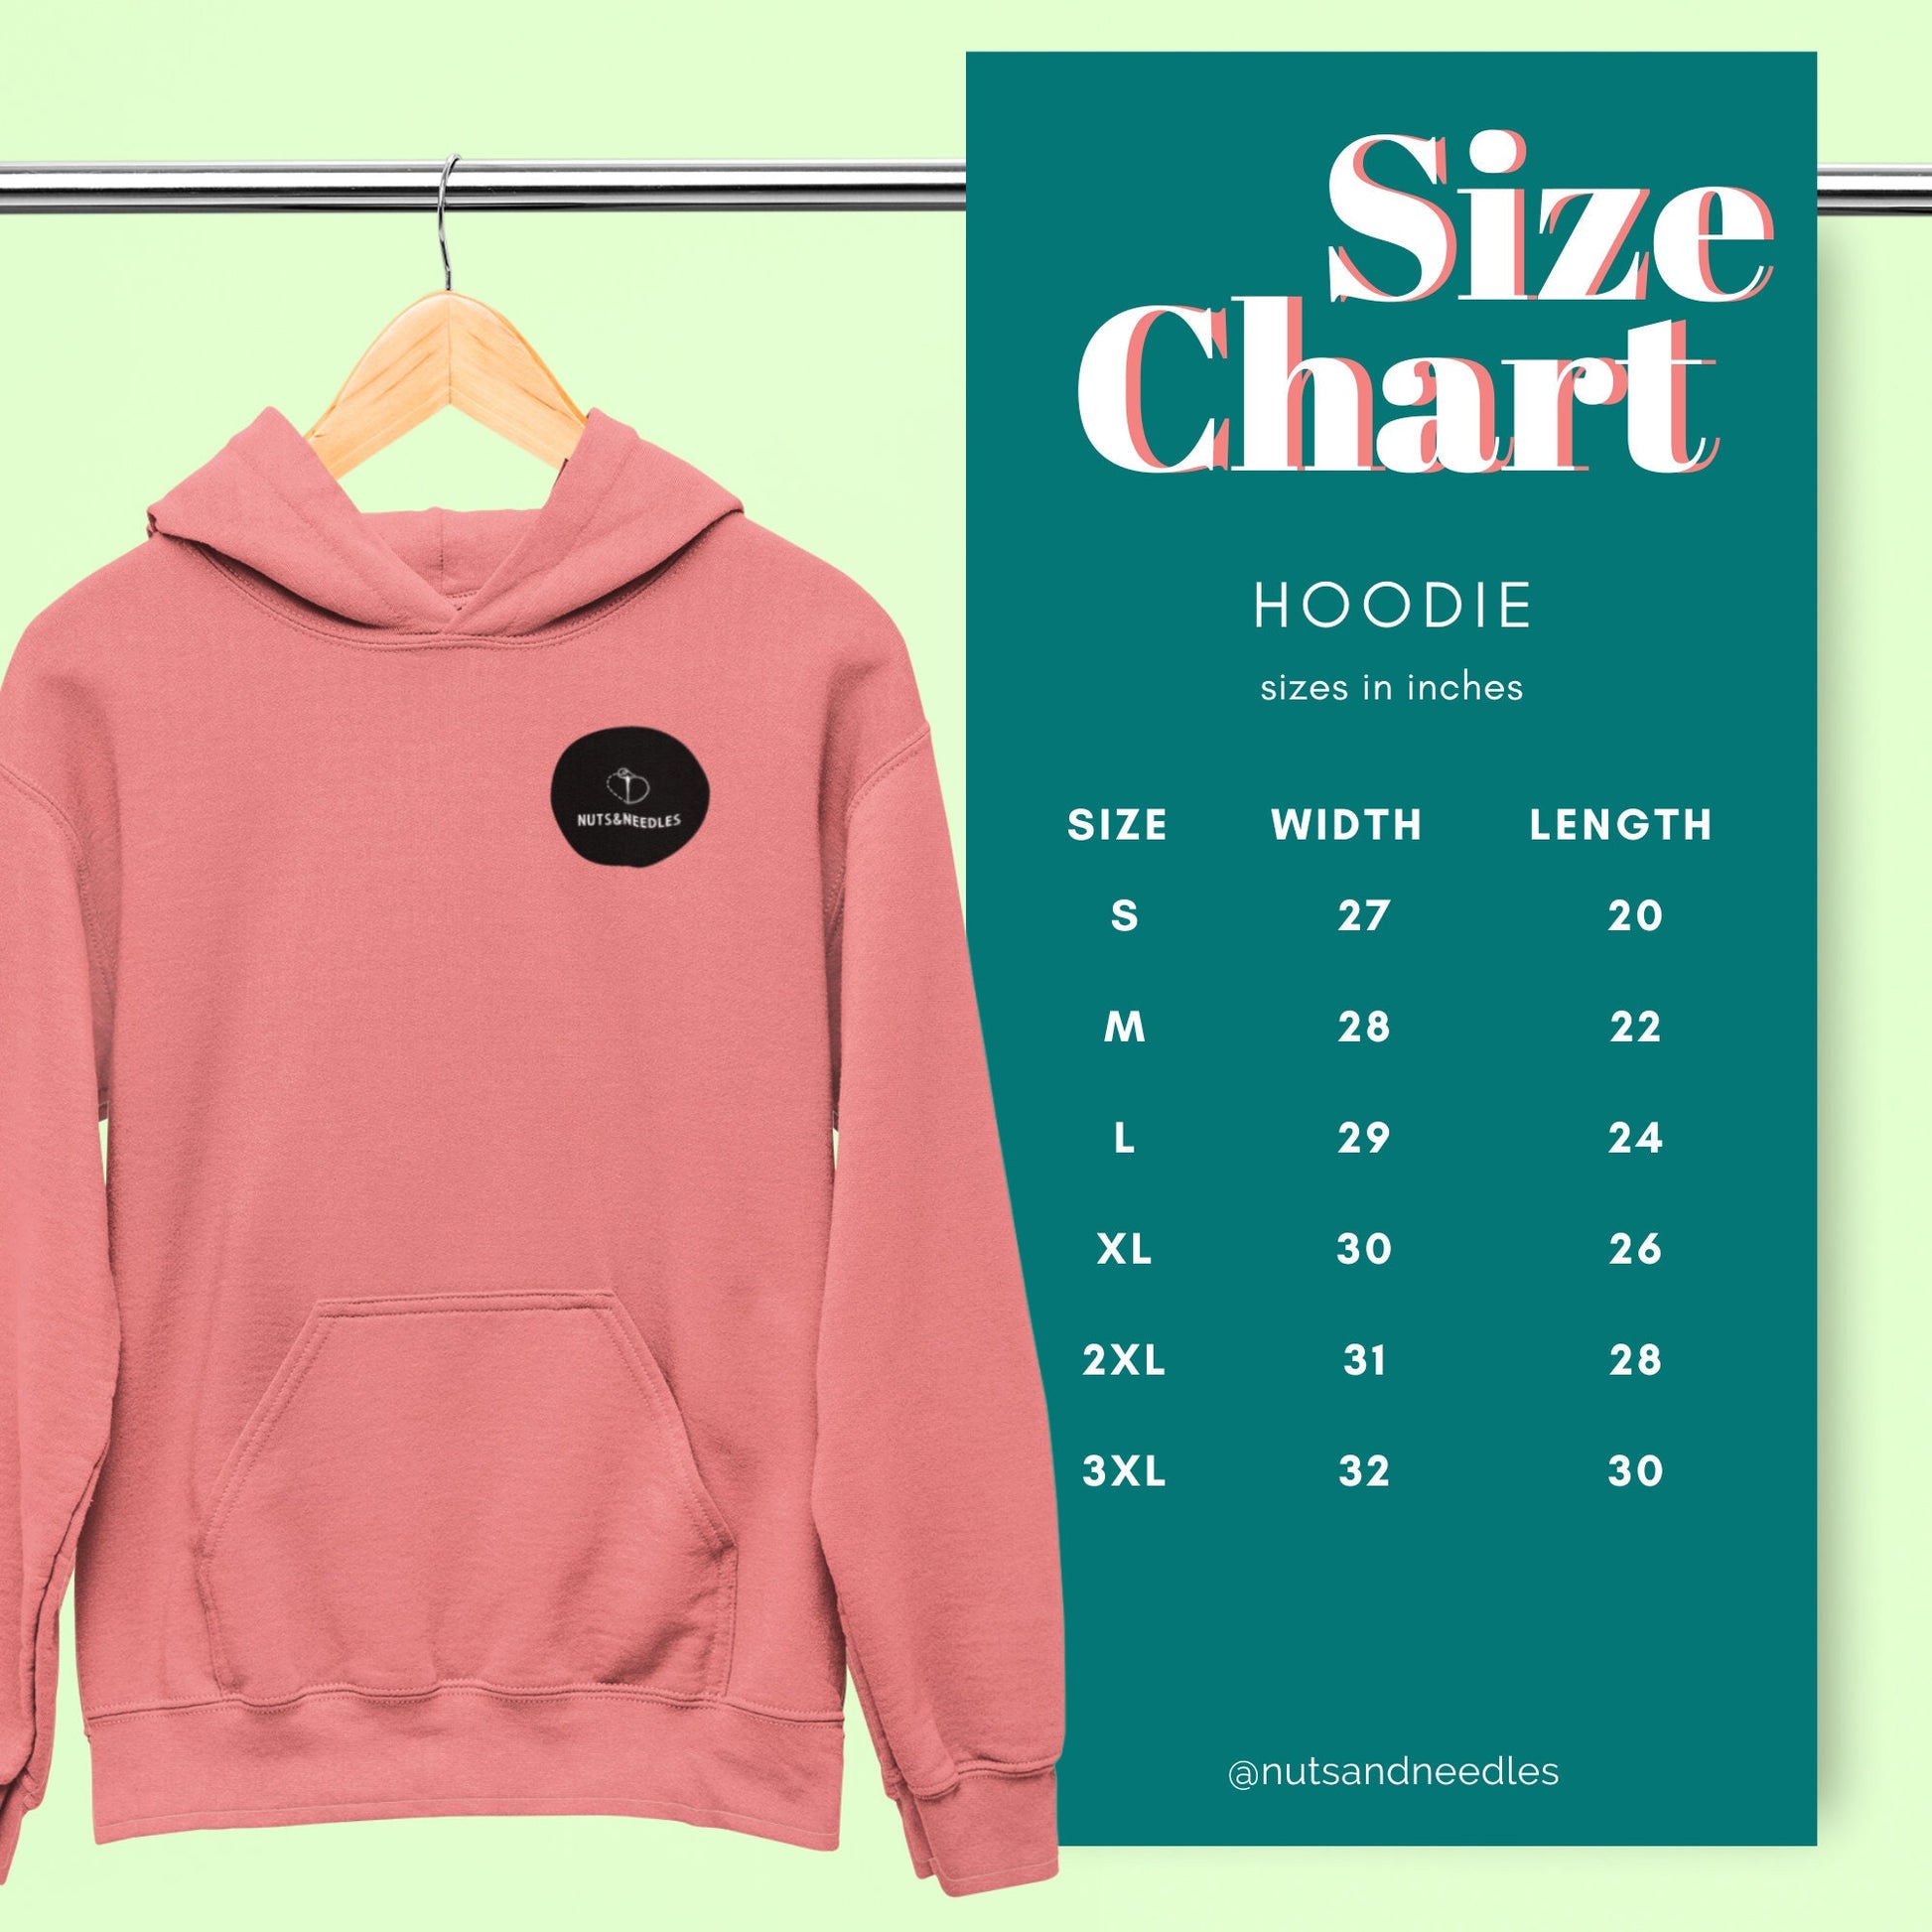 Mental Health Hoodie 'Maybe it's ADHD' Female Version, Part of Profit goes to ADHD Charity, Mental Health, Unisex Hoodie, Self Care, ADHD